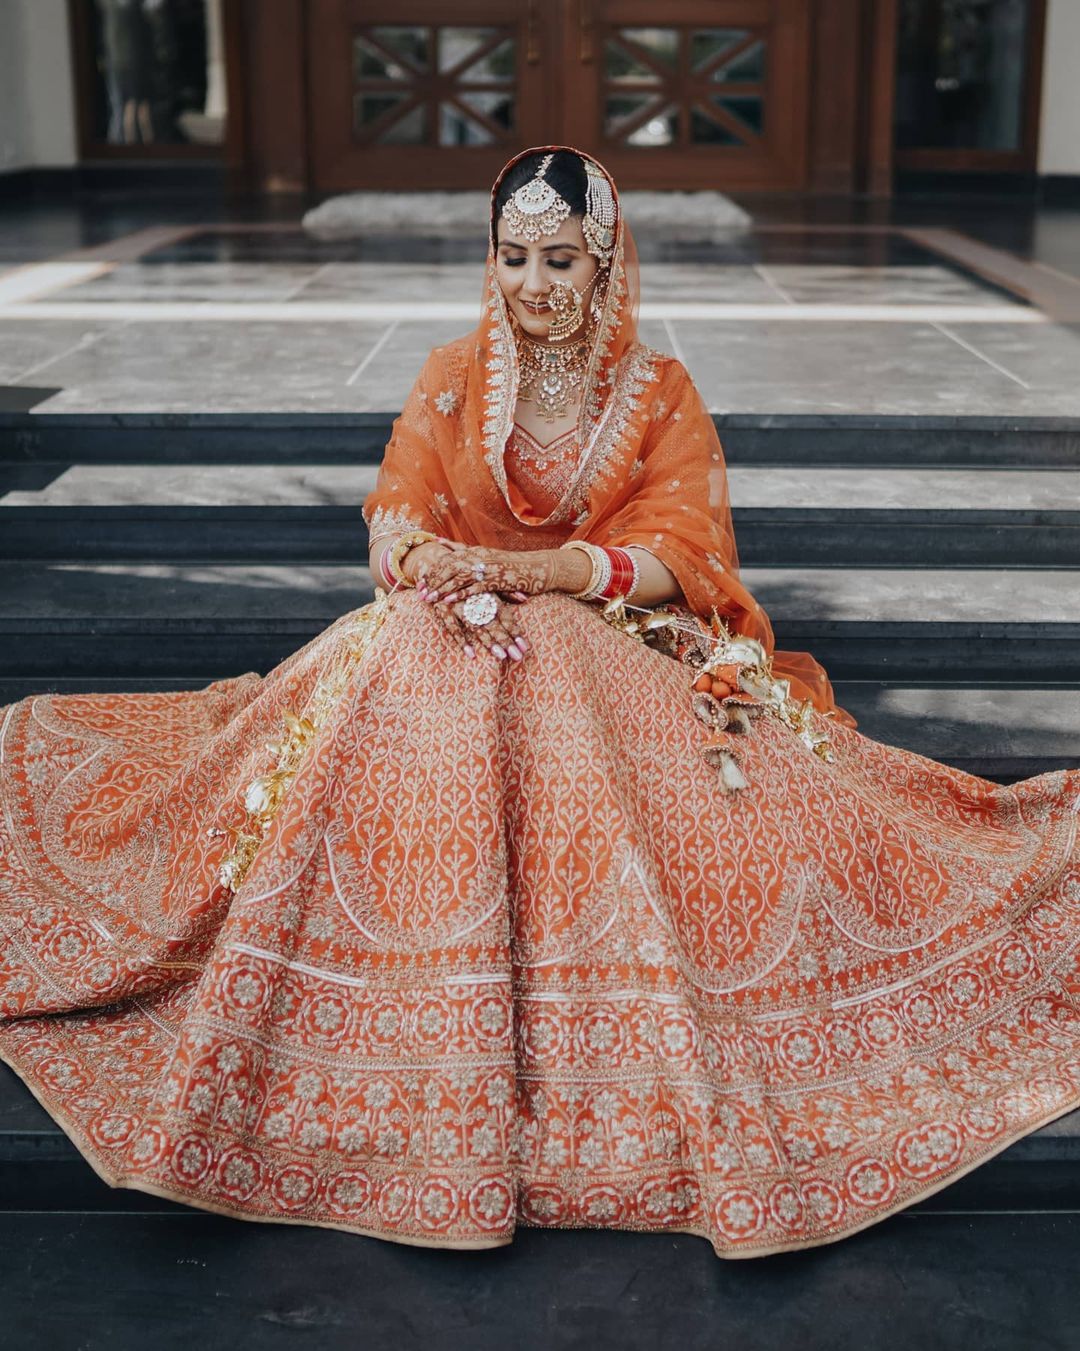 A Gorgeous Sikh Bride In A Beautifully Embroidered Lehenga